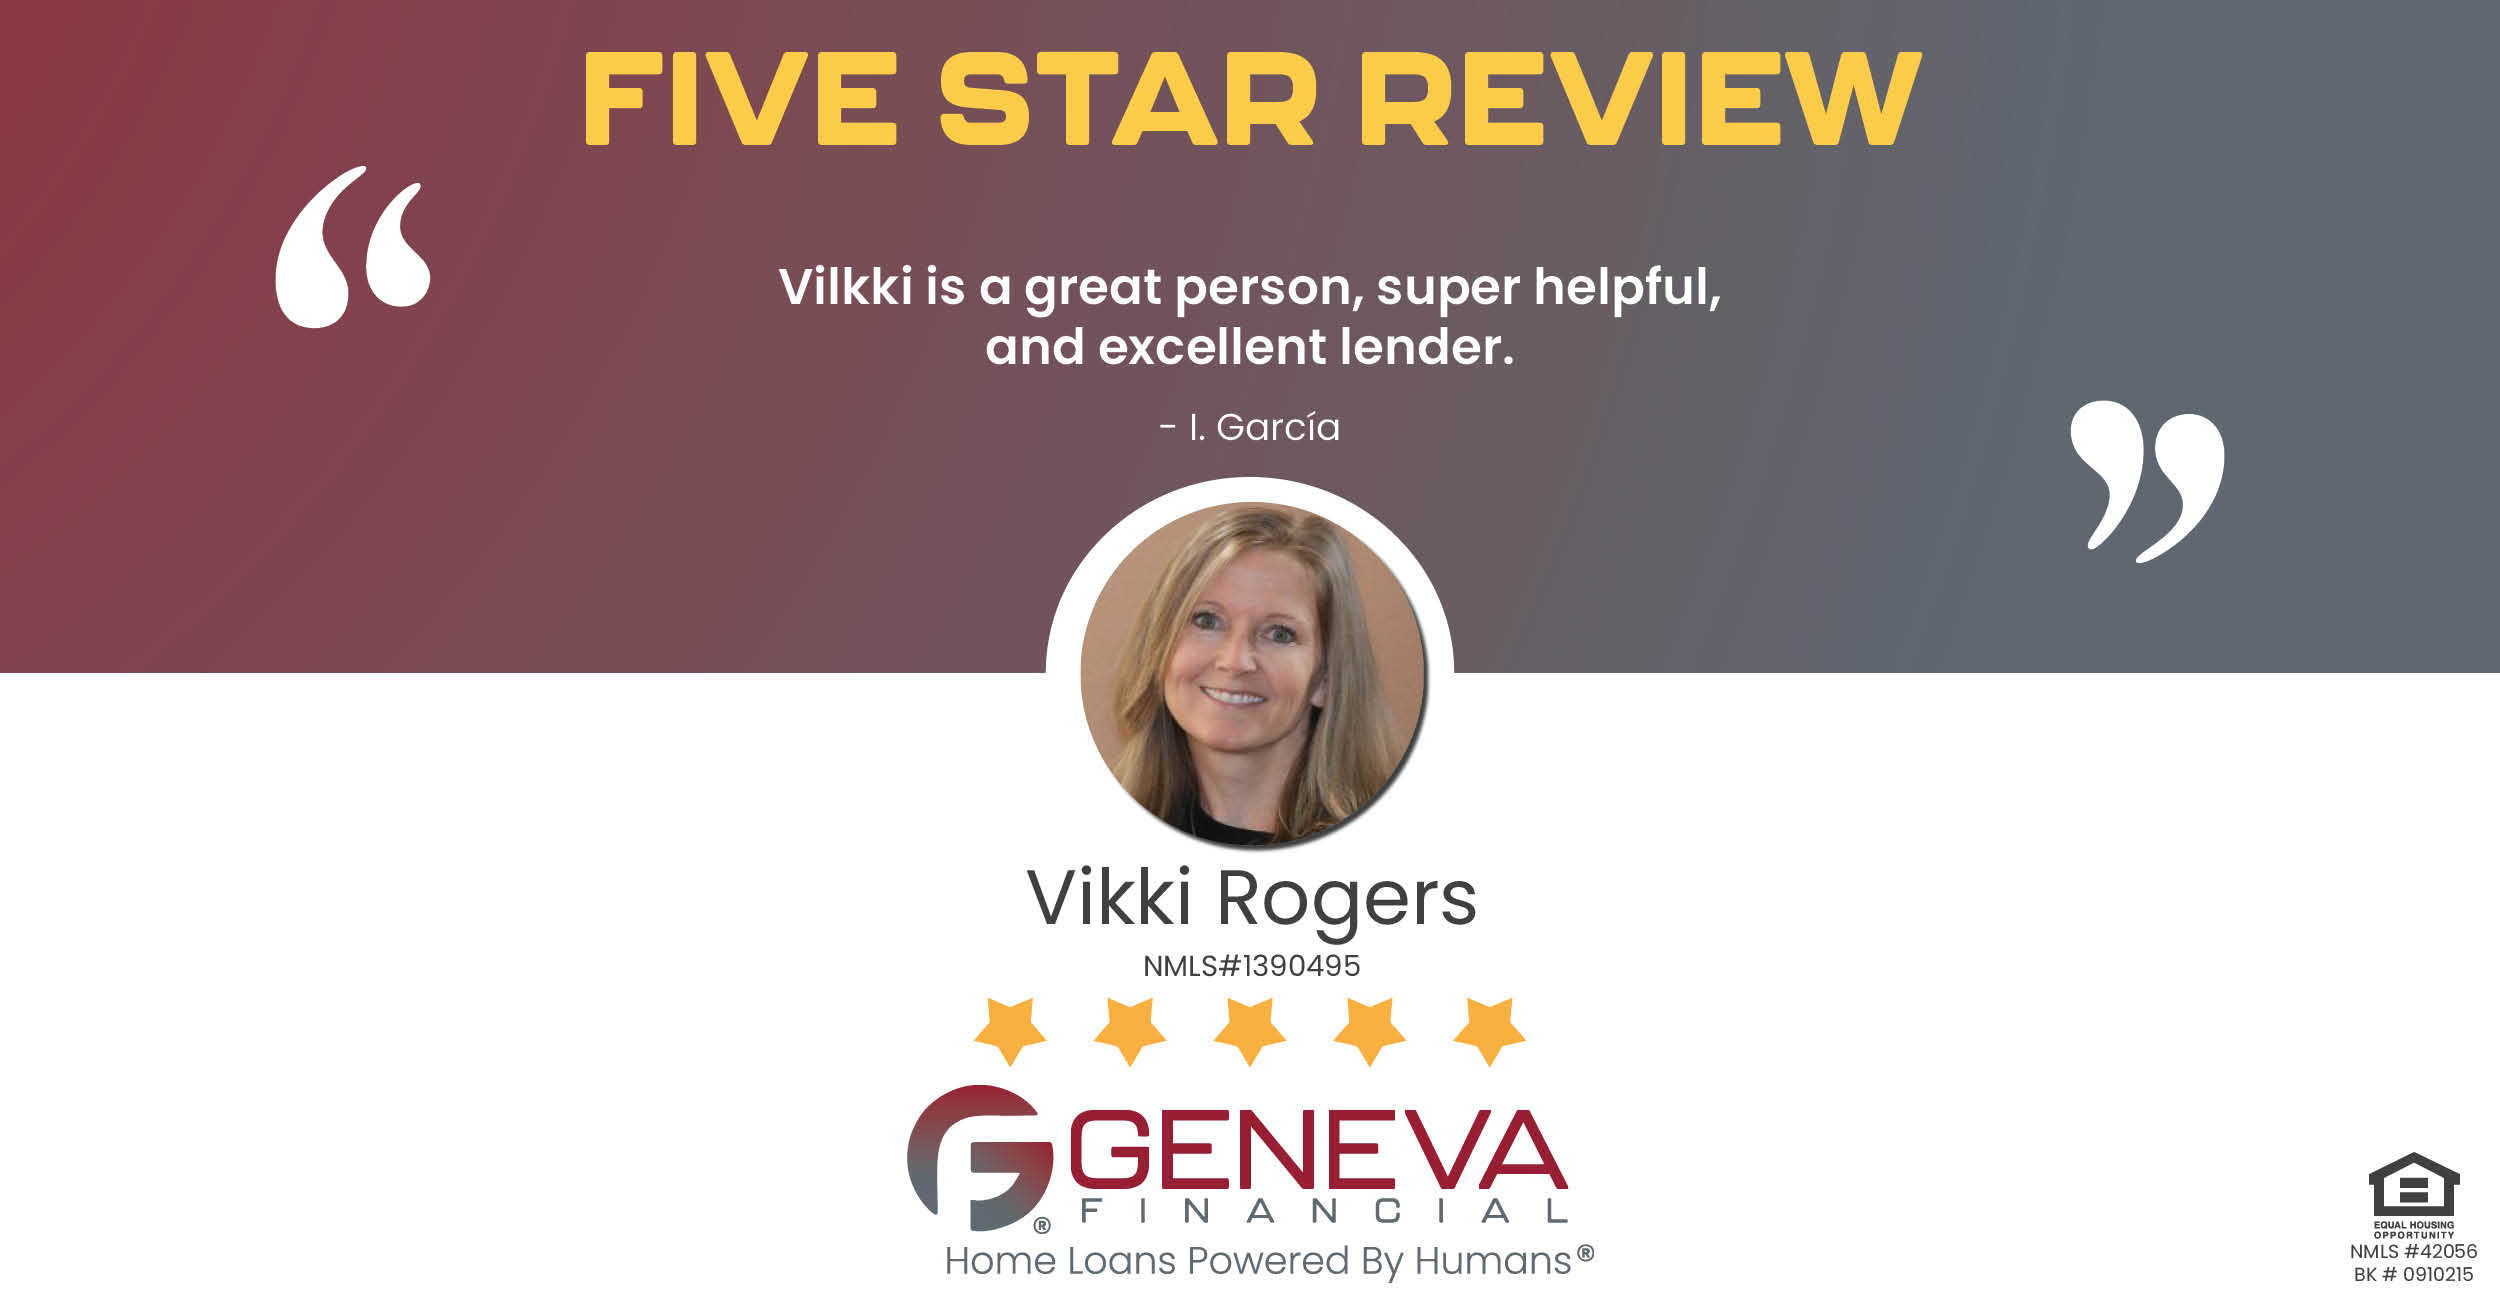 5 Star Review for Vikki Rogers, Licensed Mortgage Loan Officer with Geneva Financial, Winter Garden, Florida – Home Loans Powered by Humans®.